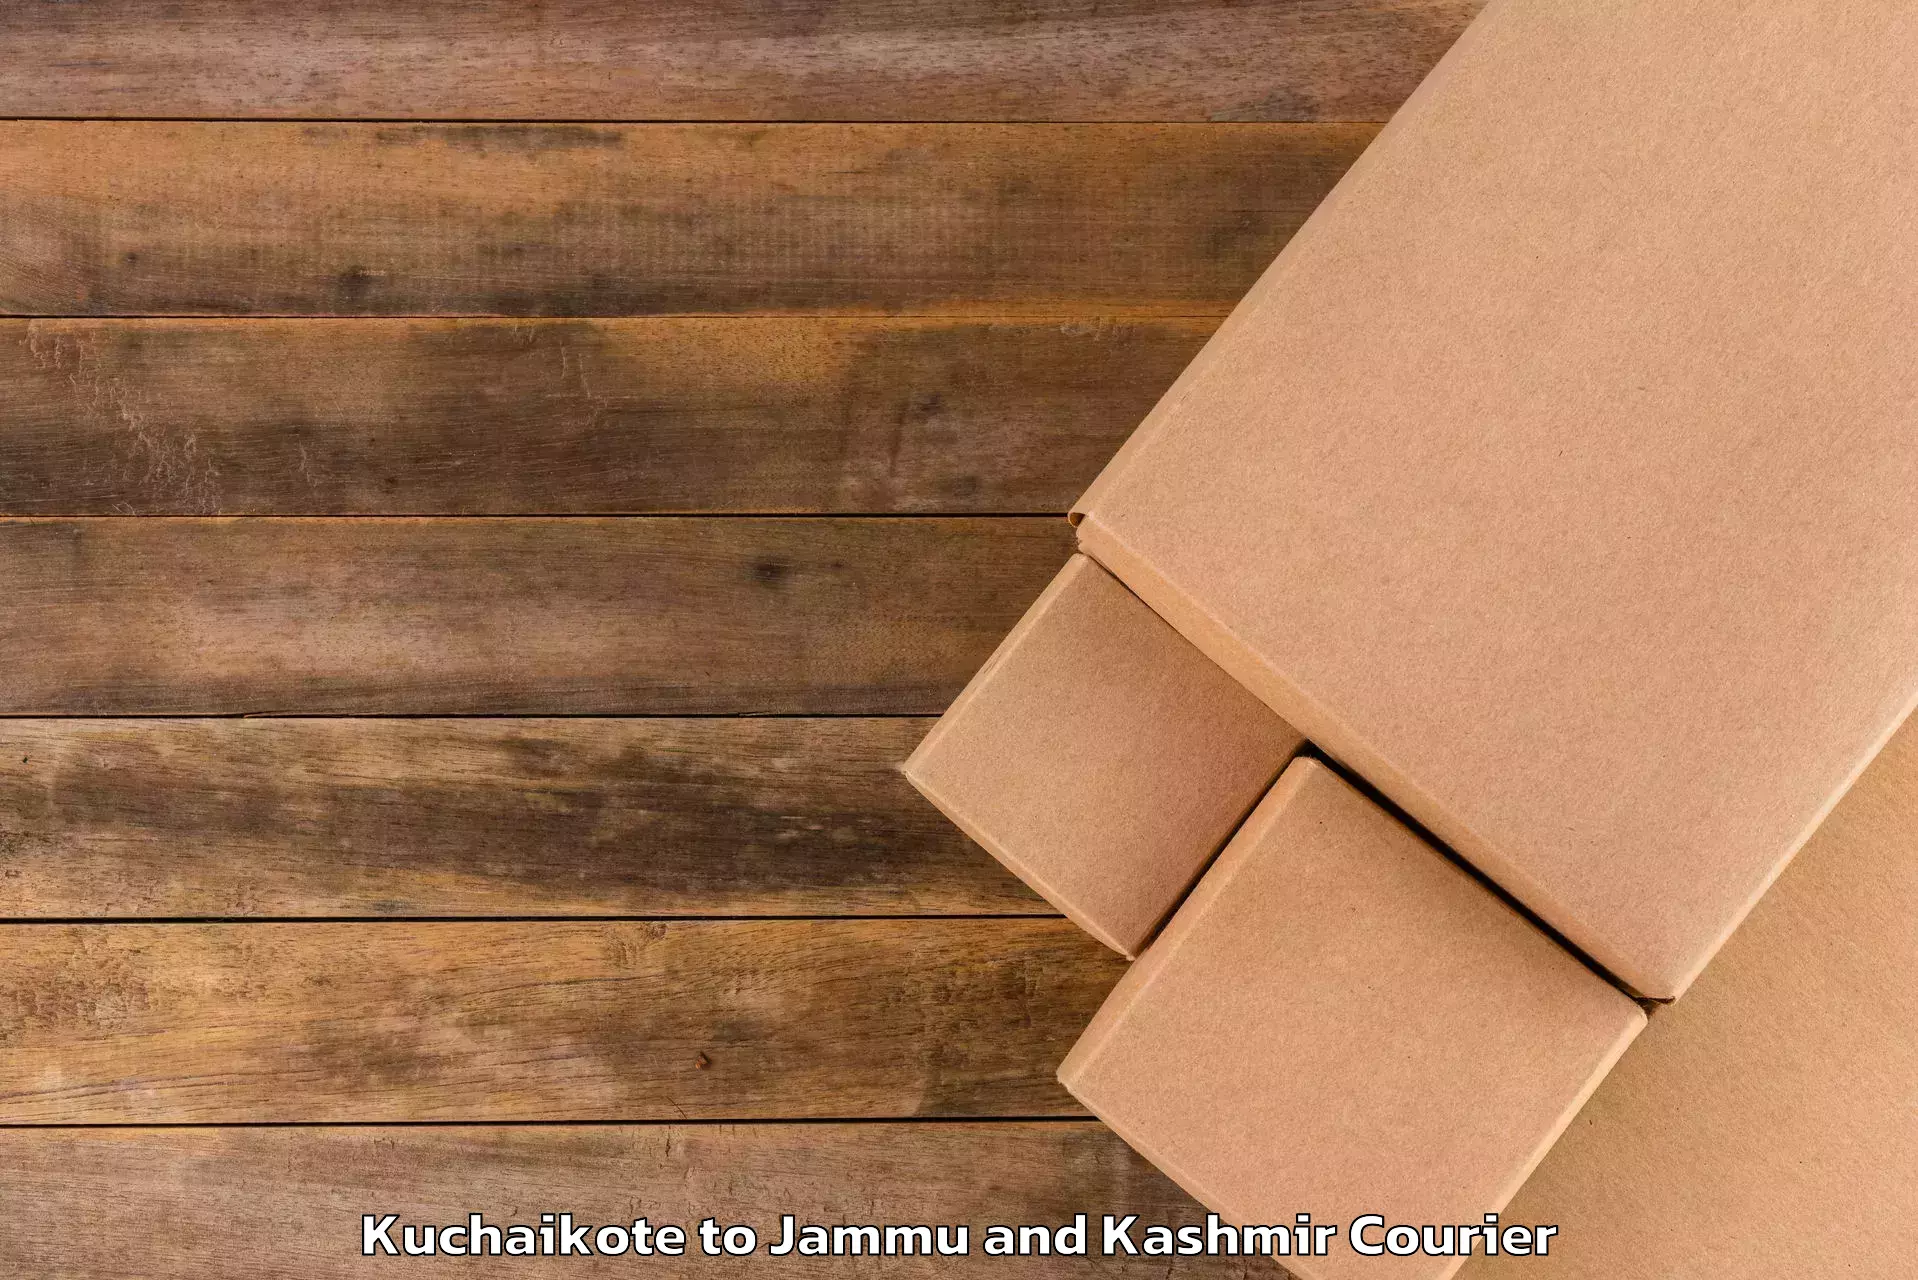 Luggage transport consulting in Kuchaikote to Jammu and Kashmir